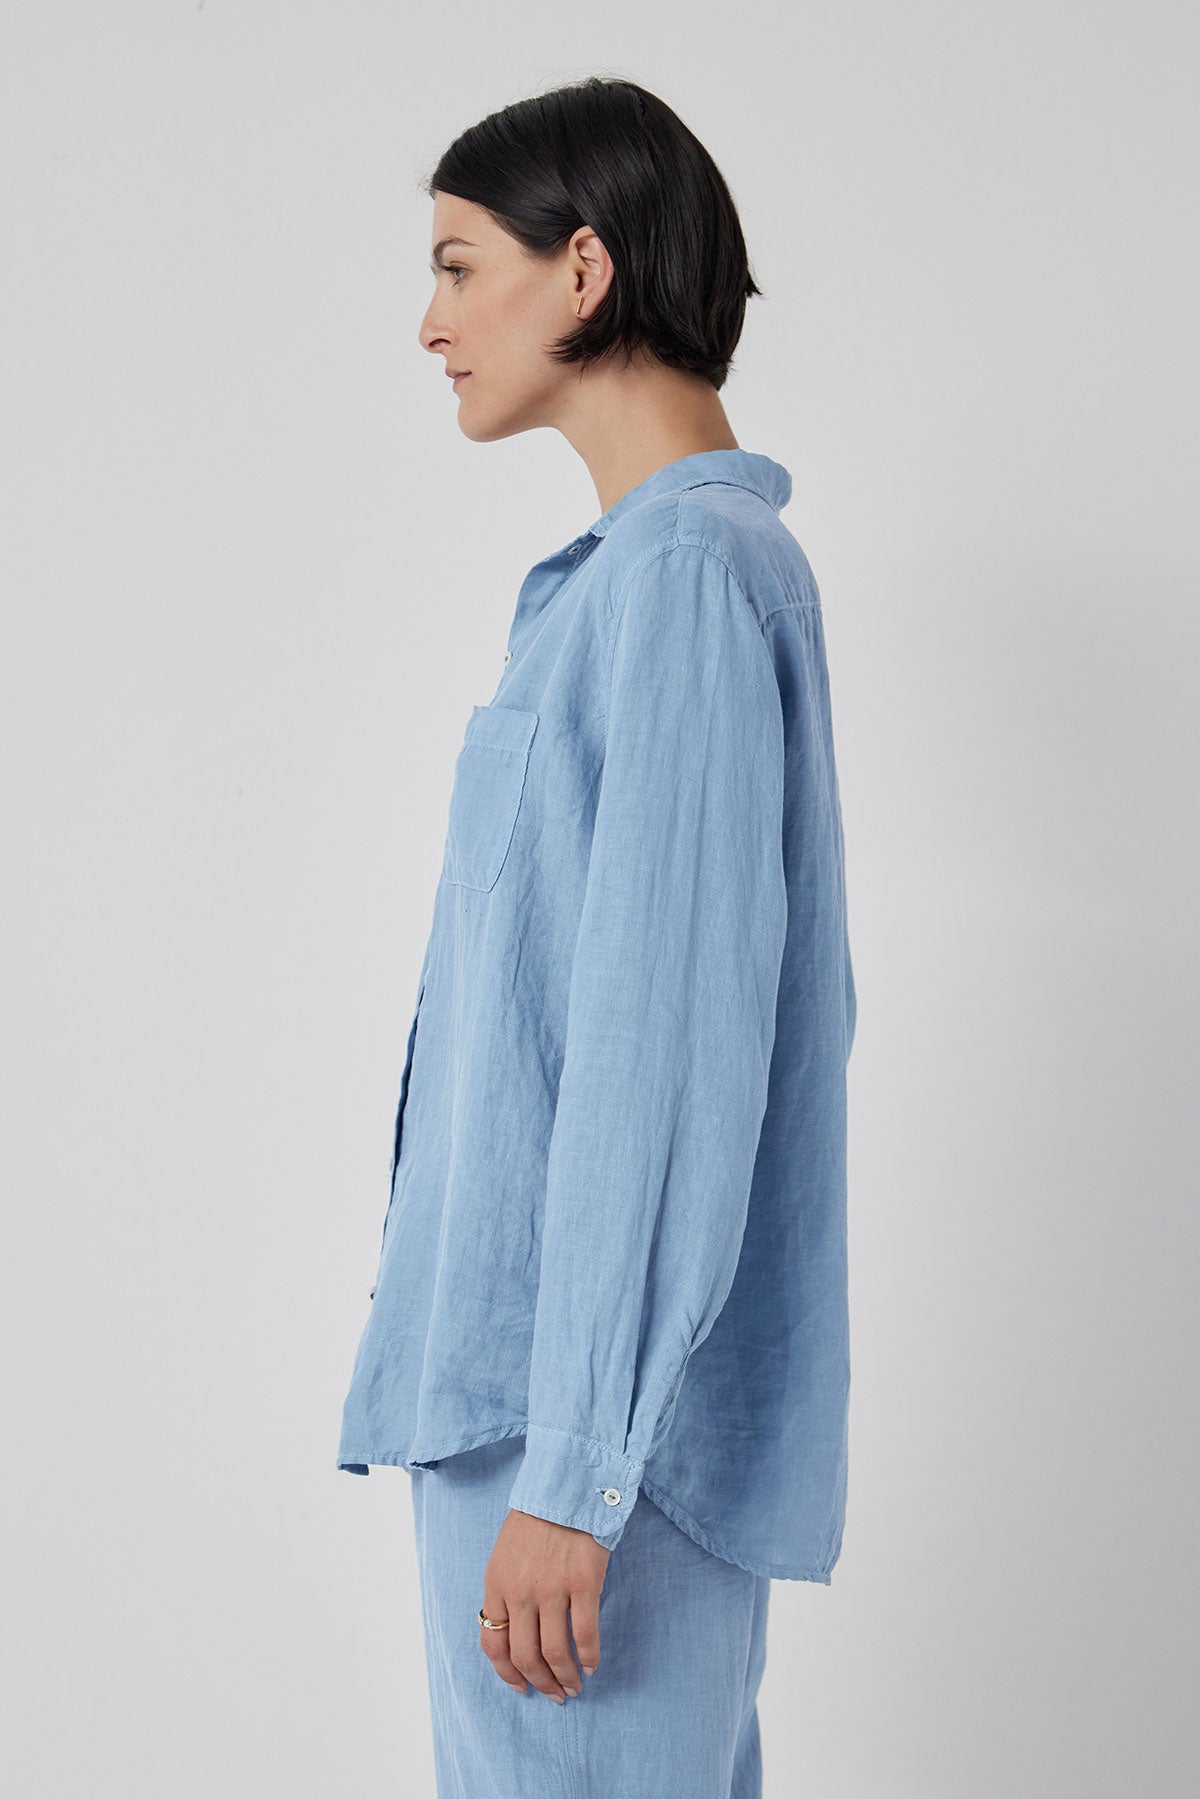 A woman with a relaxed silhouette is seen from the back wearing a blue linen Mulholland shirt by Velvet by Jenny Graham with a scooped hemline.-36212599357633